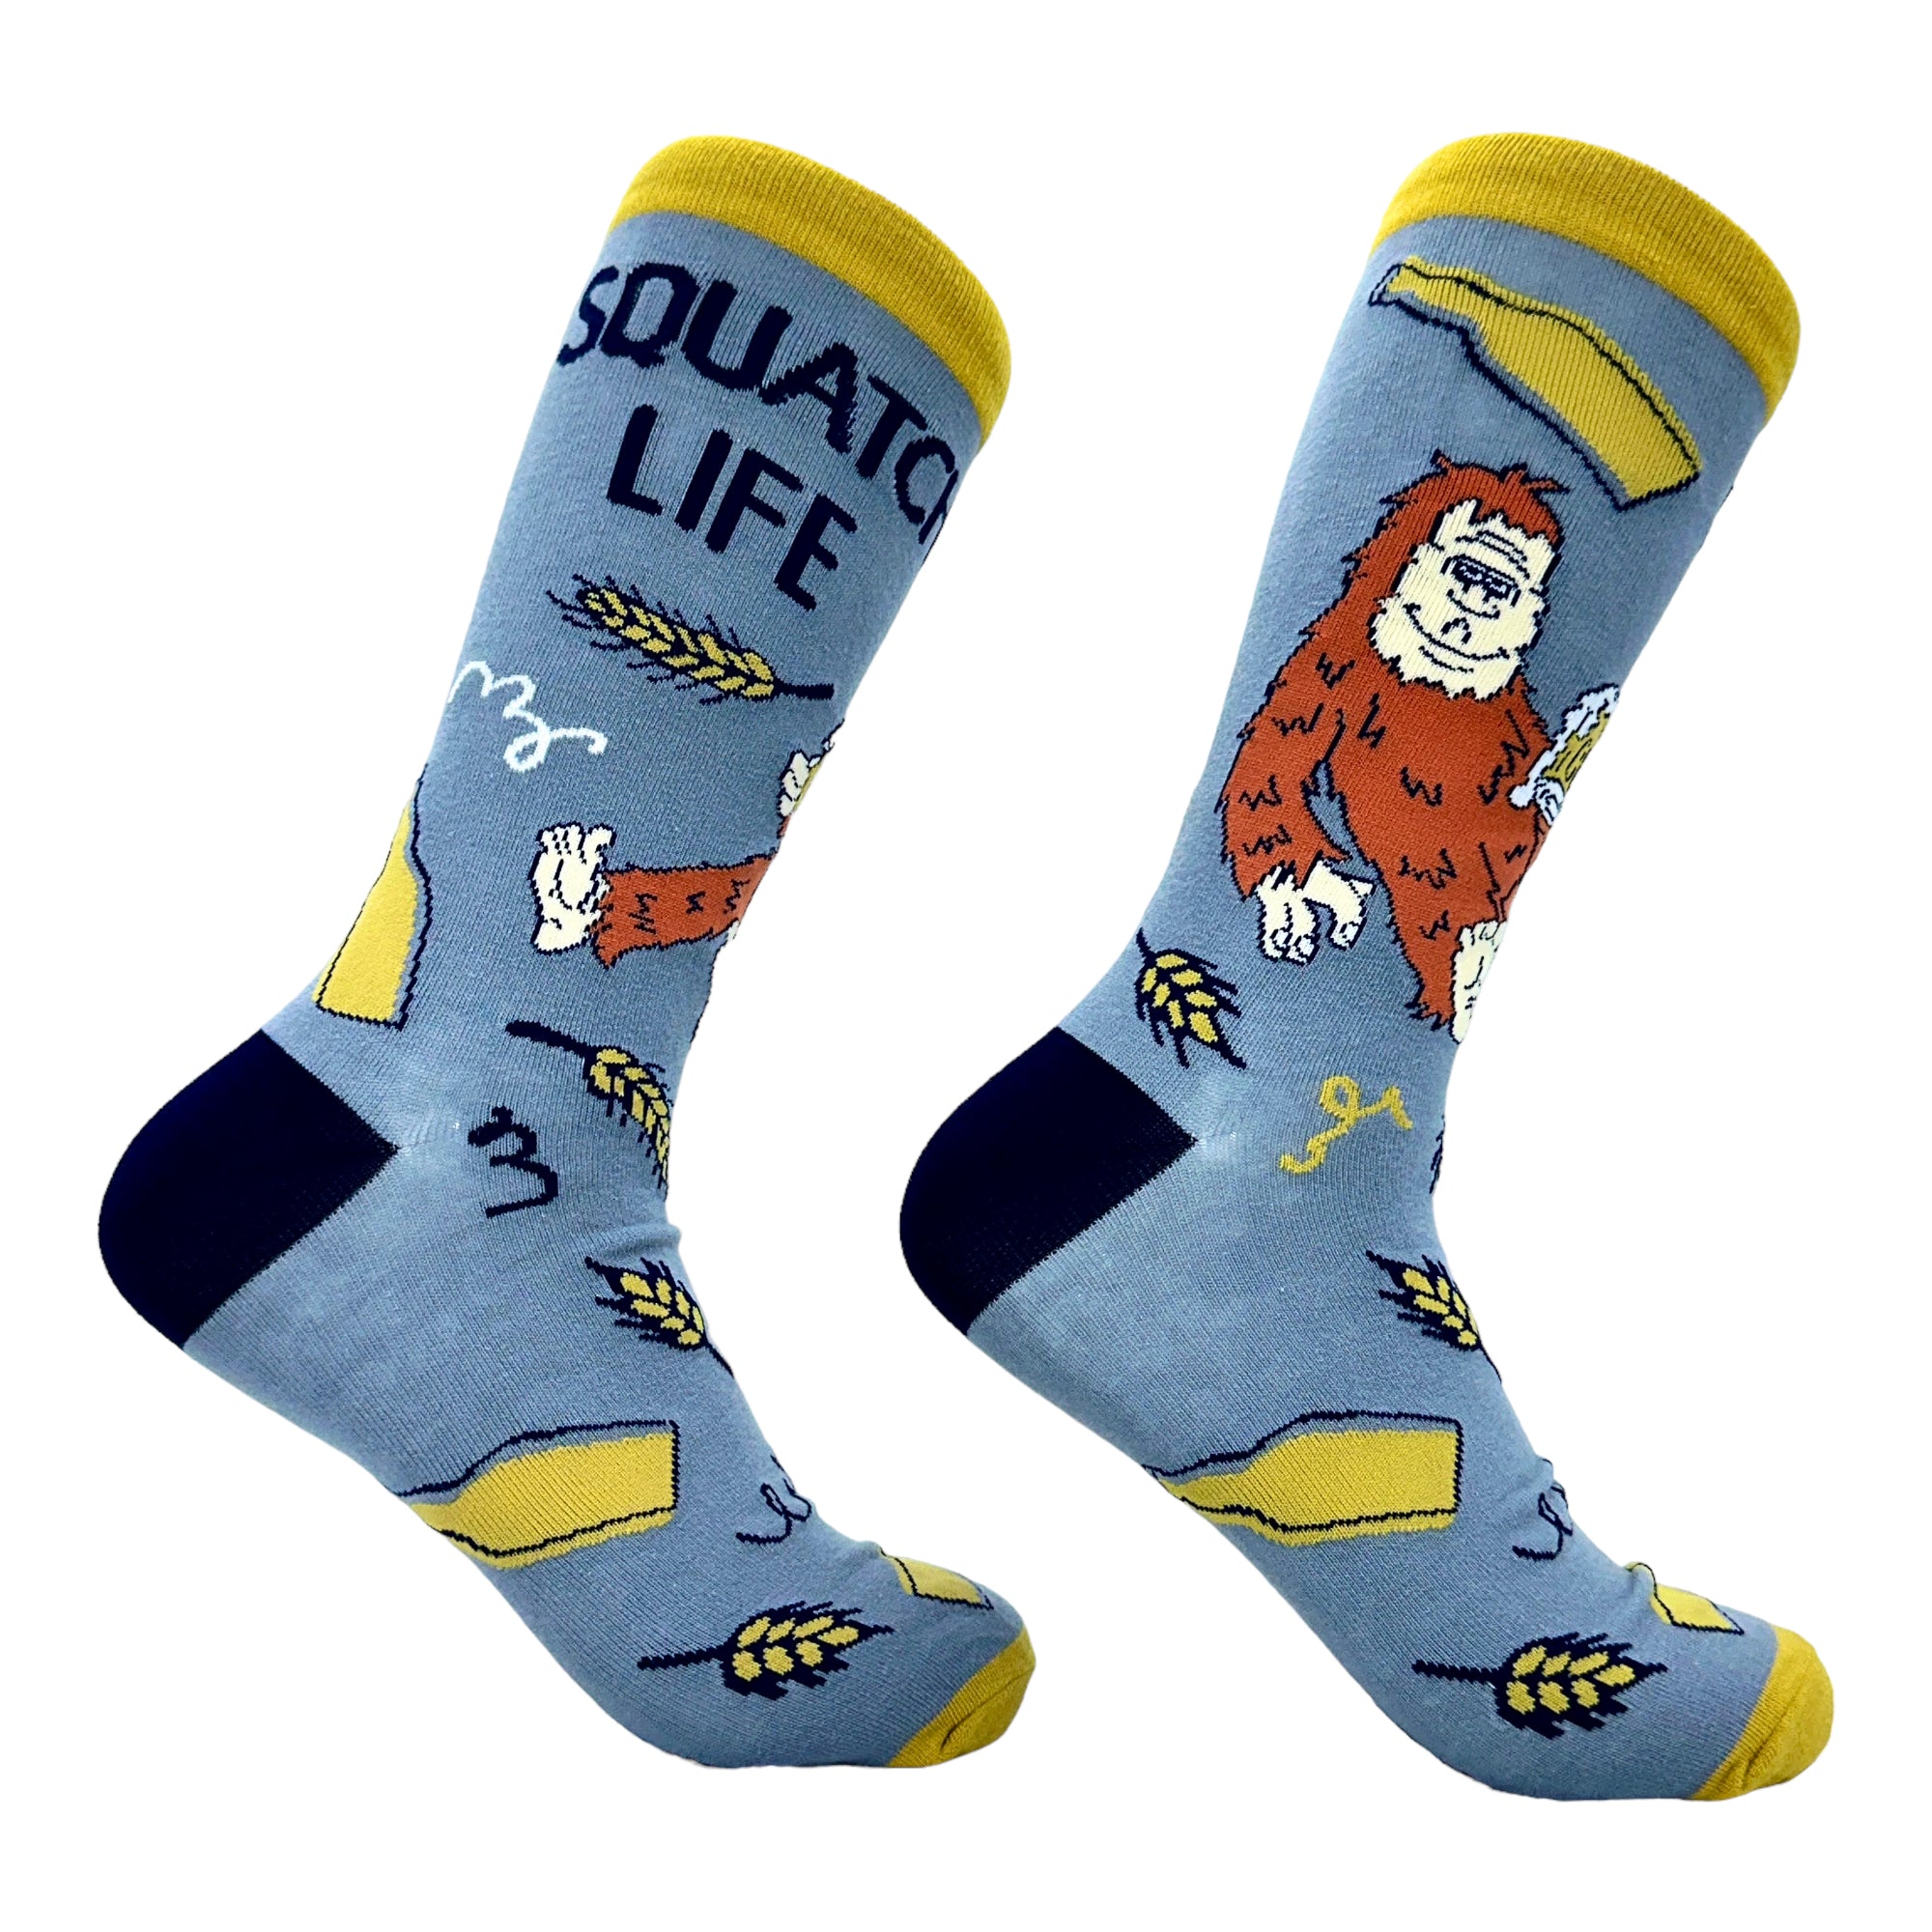 Funny Multi - Squatch Life Men's Squatch Life Sock Nerdy Beer Drinking sarcastic Tee